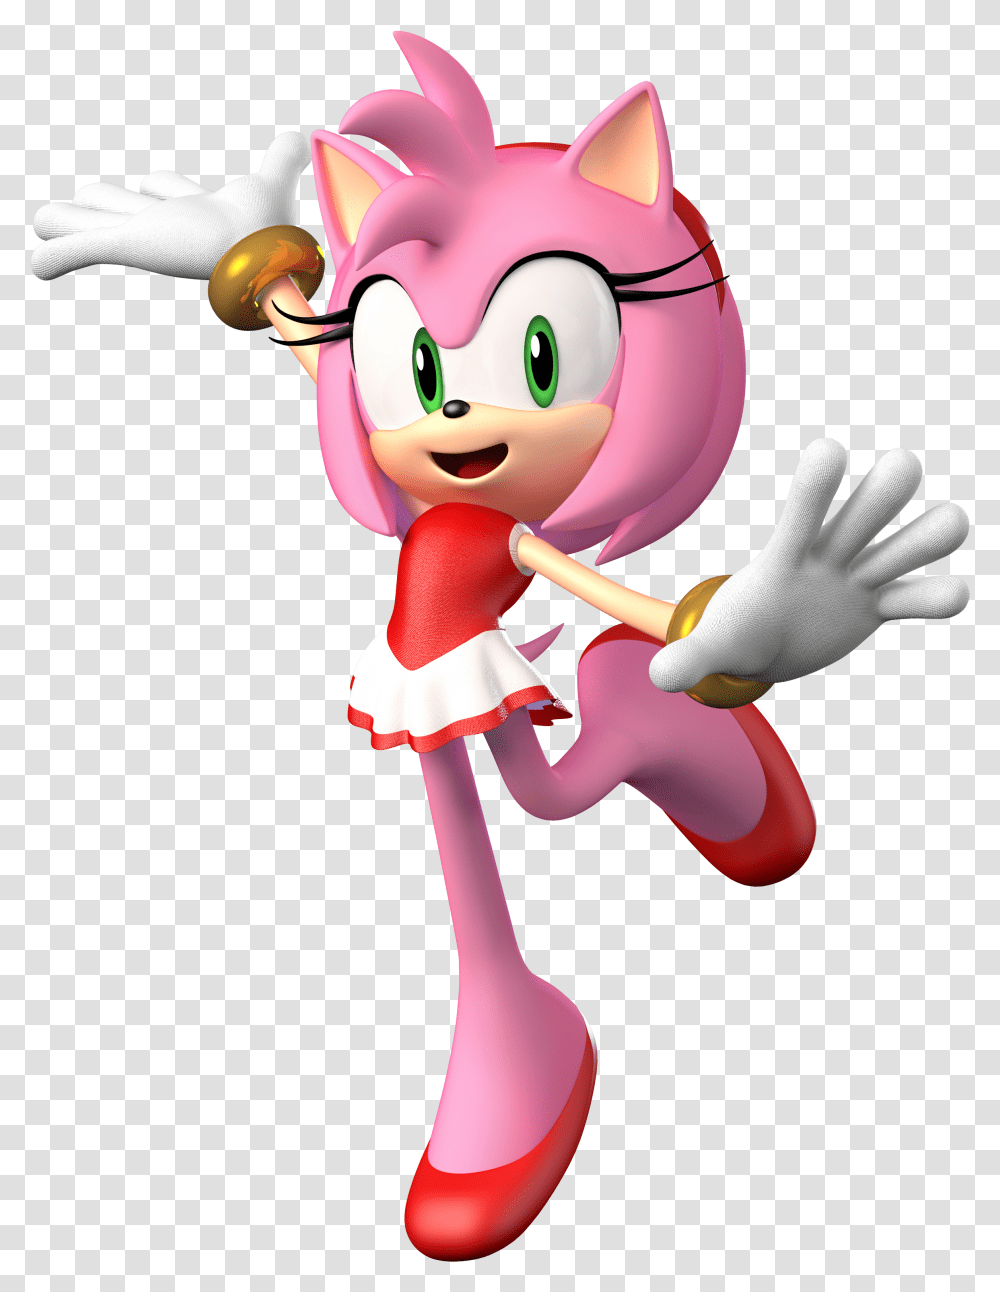 Amy Mario Y Sonic At The Rio 2016 Olympic Games Amy, Toy, Performer, Sweets, Food Transparent Png